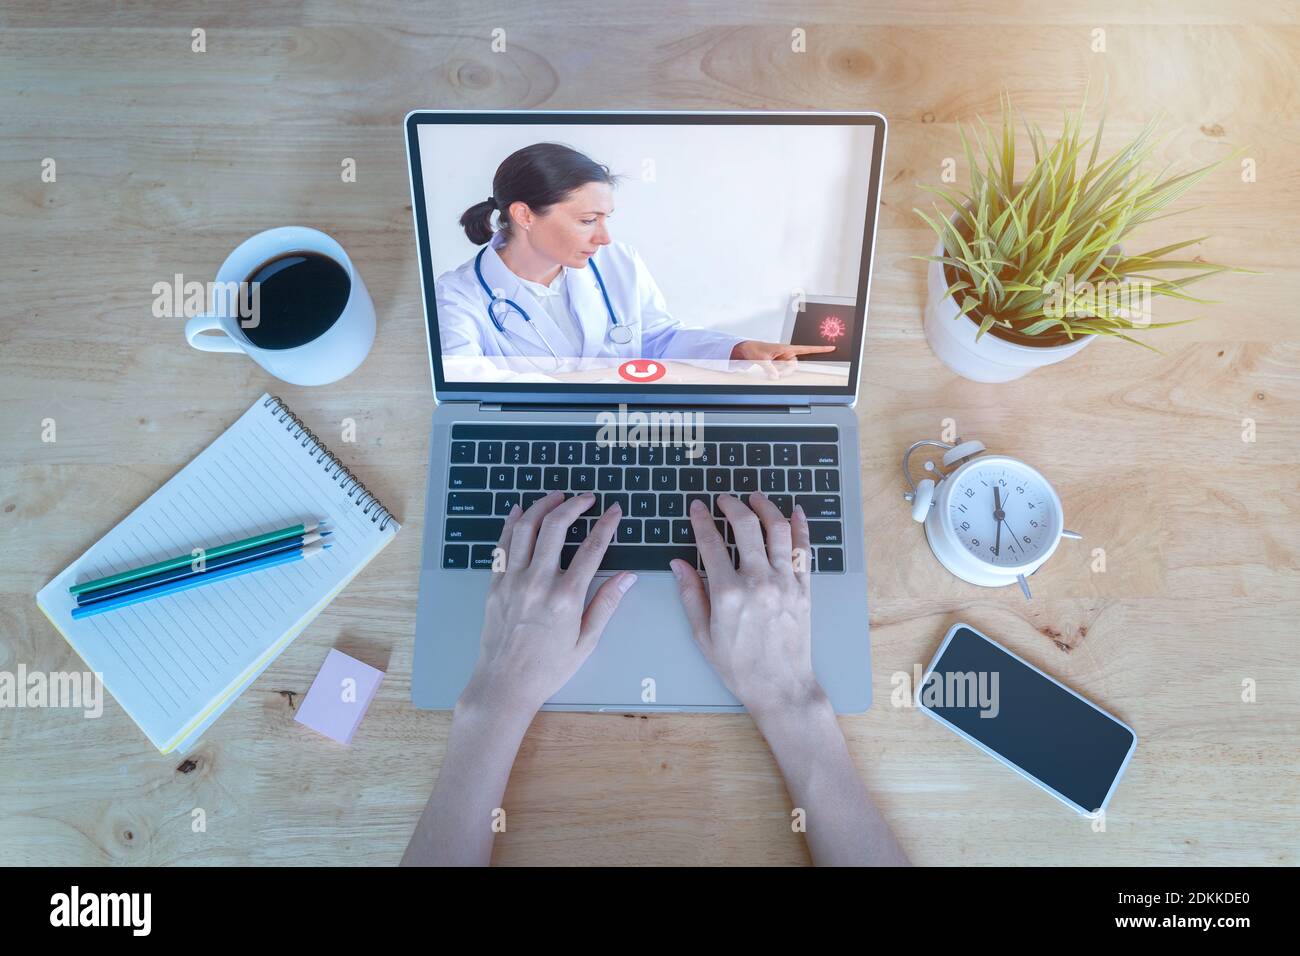 Cropped Hands Of Woman Video Conferencing Over Laptop In Hospital Stock Photo